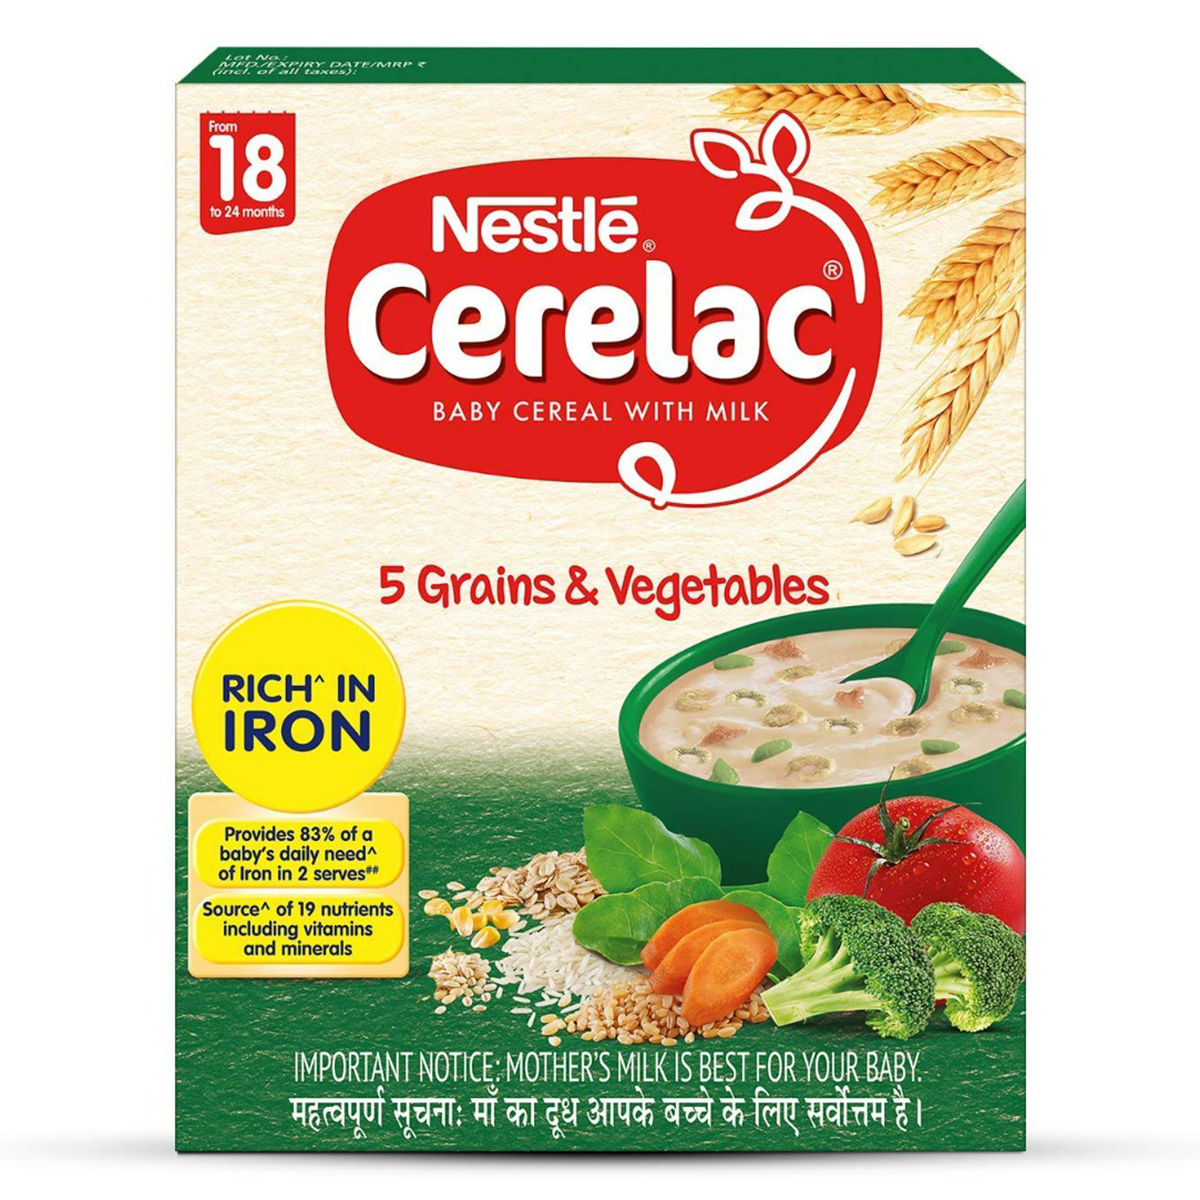 Buy Nestle Cerelac Baby Cereal with Milk Wheat 5 Grains & Vegetables (18 to 24 Months) Powder, 300 gm Online